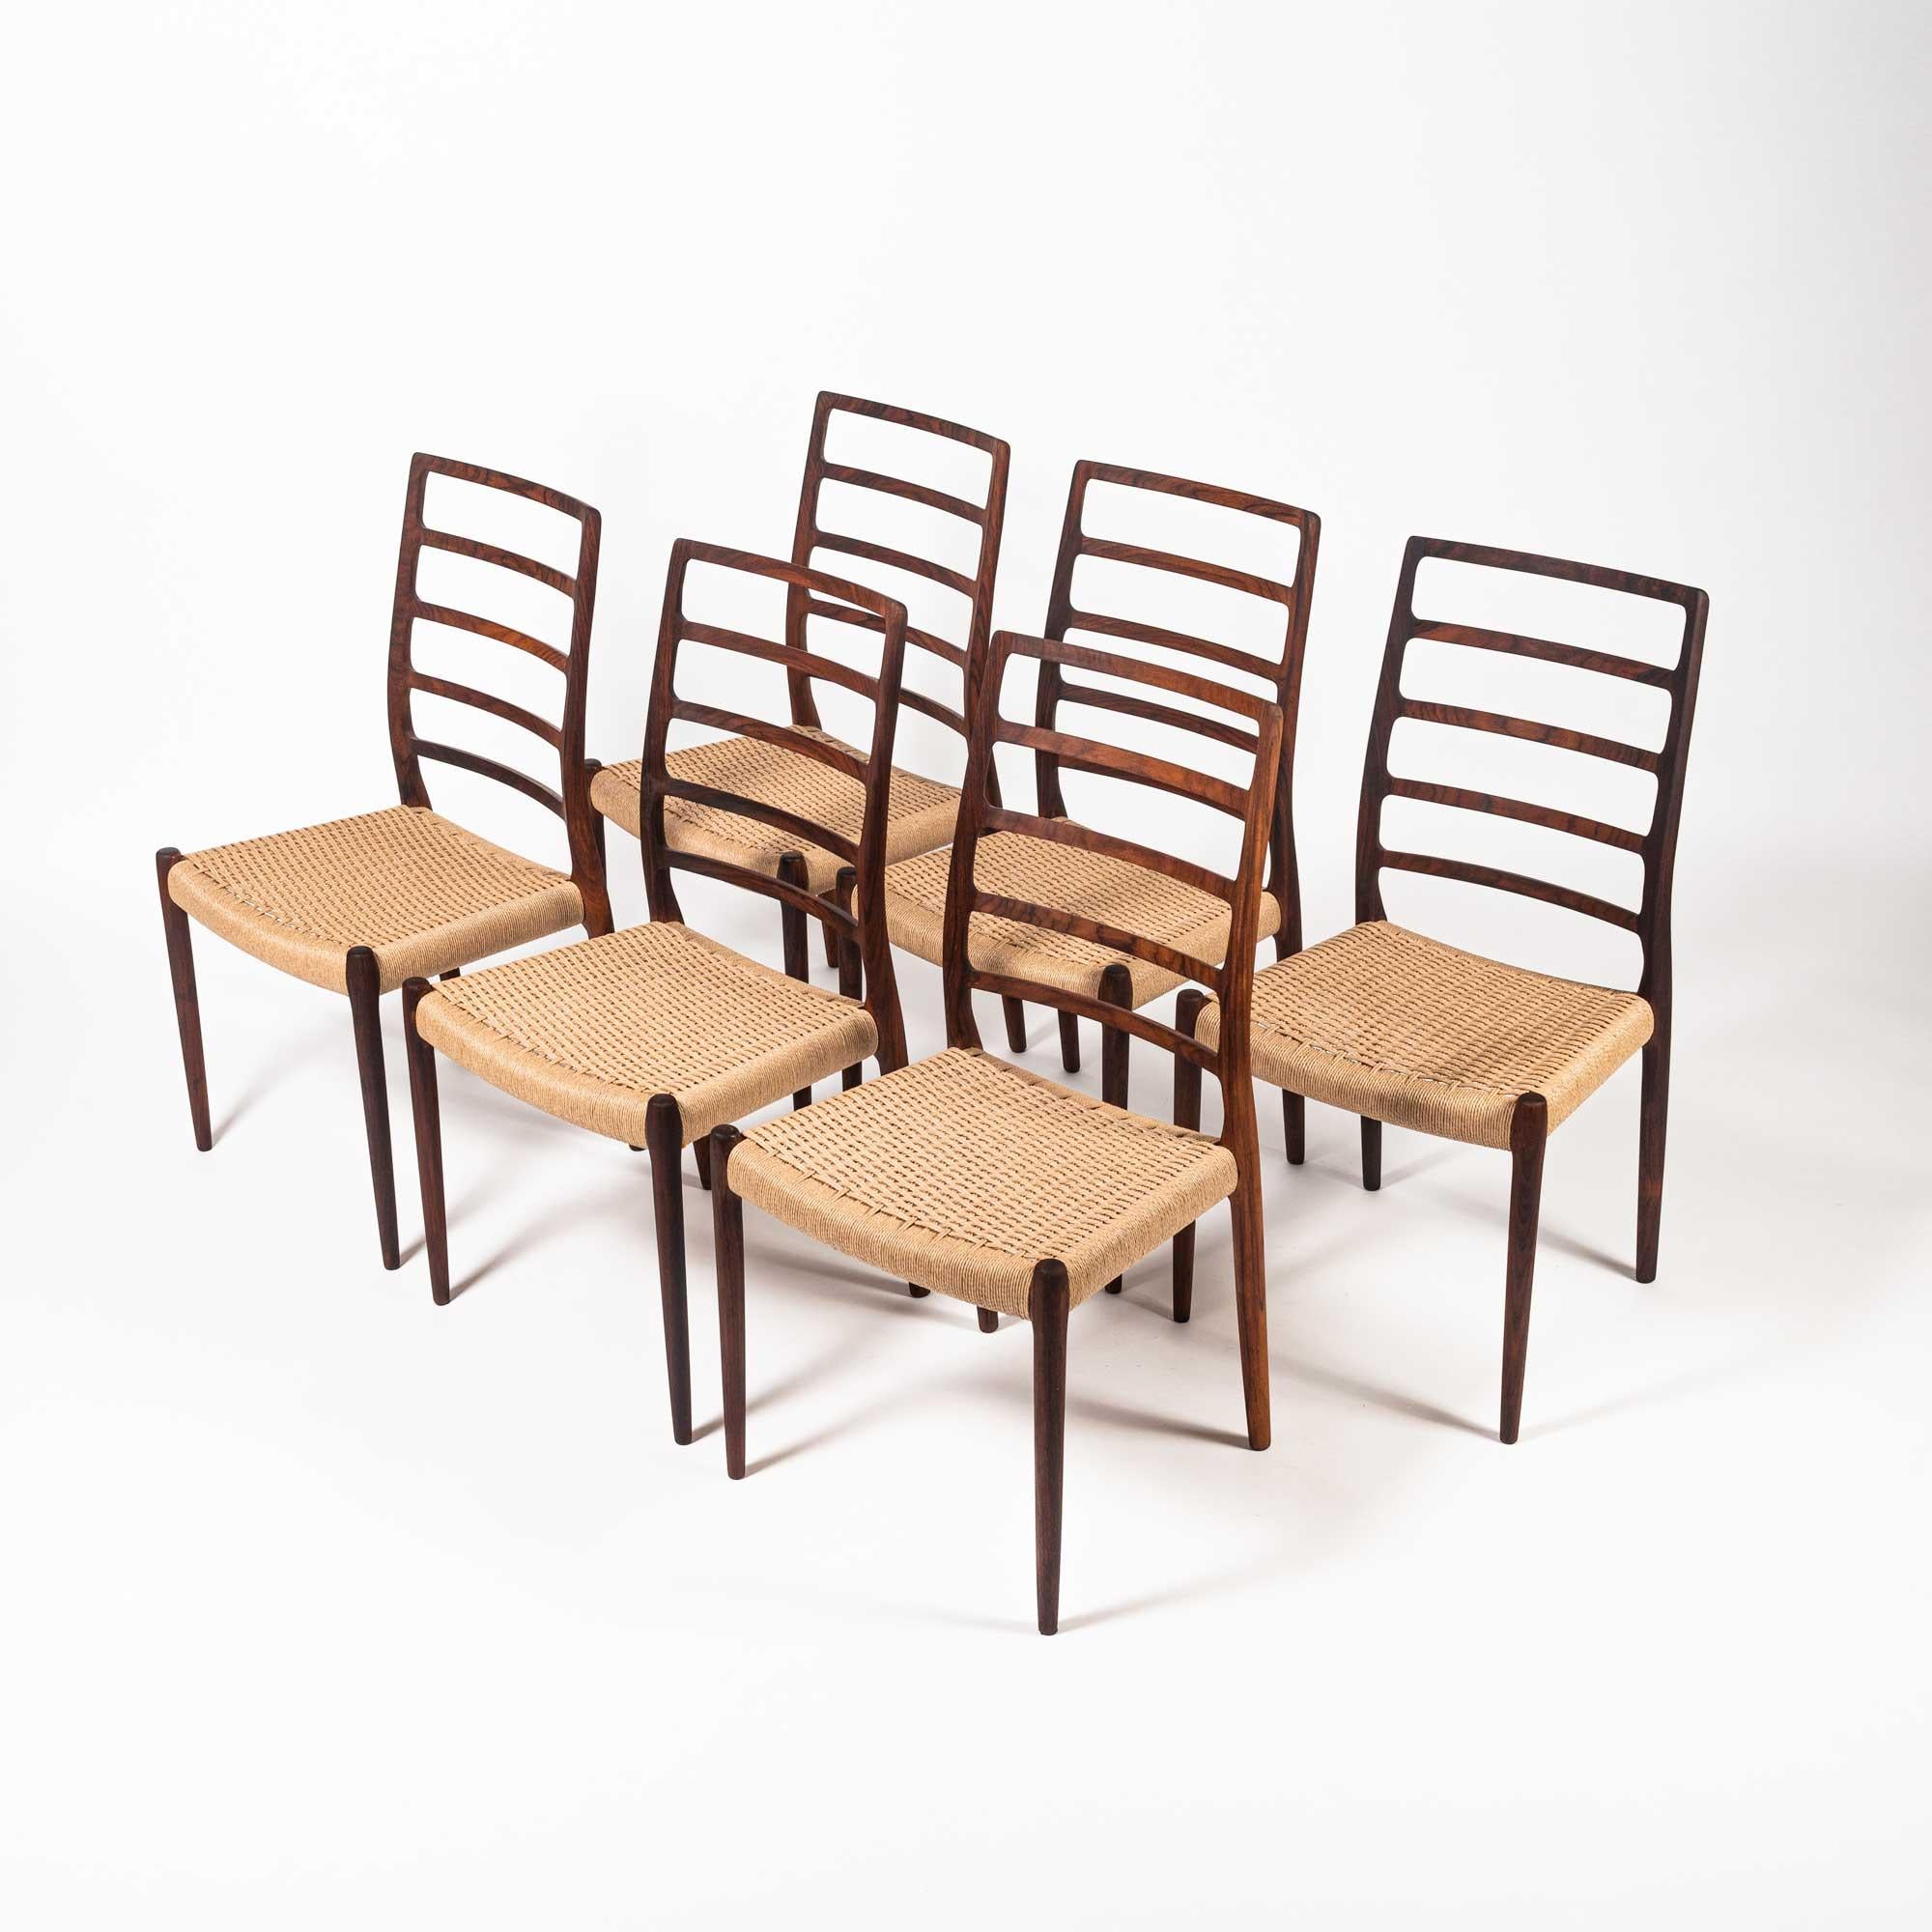 Rare and iconic set of 6 rosewood dining chairs designed by Niels Otto Moller for JL Møller Møbelfabrik in 1954. The set has been completely restored, with all new natural paper-cord. 